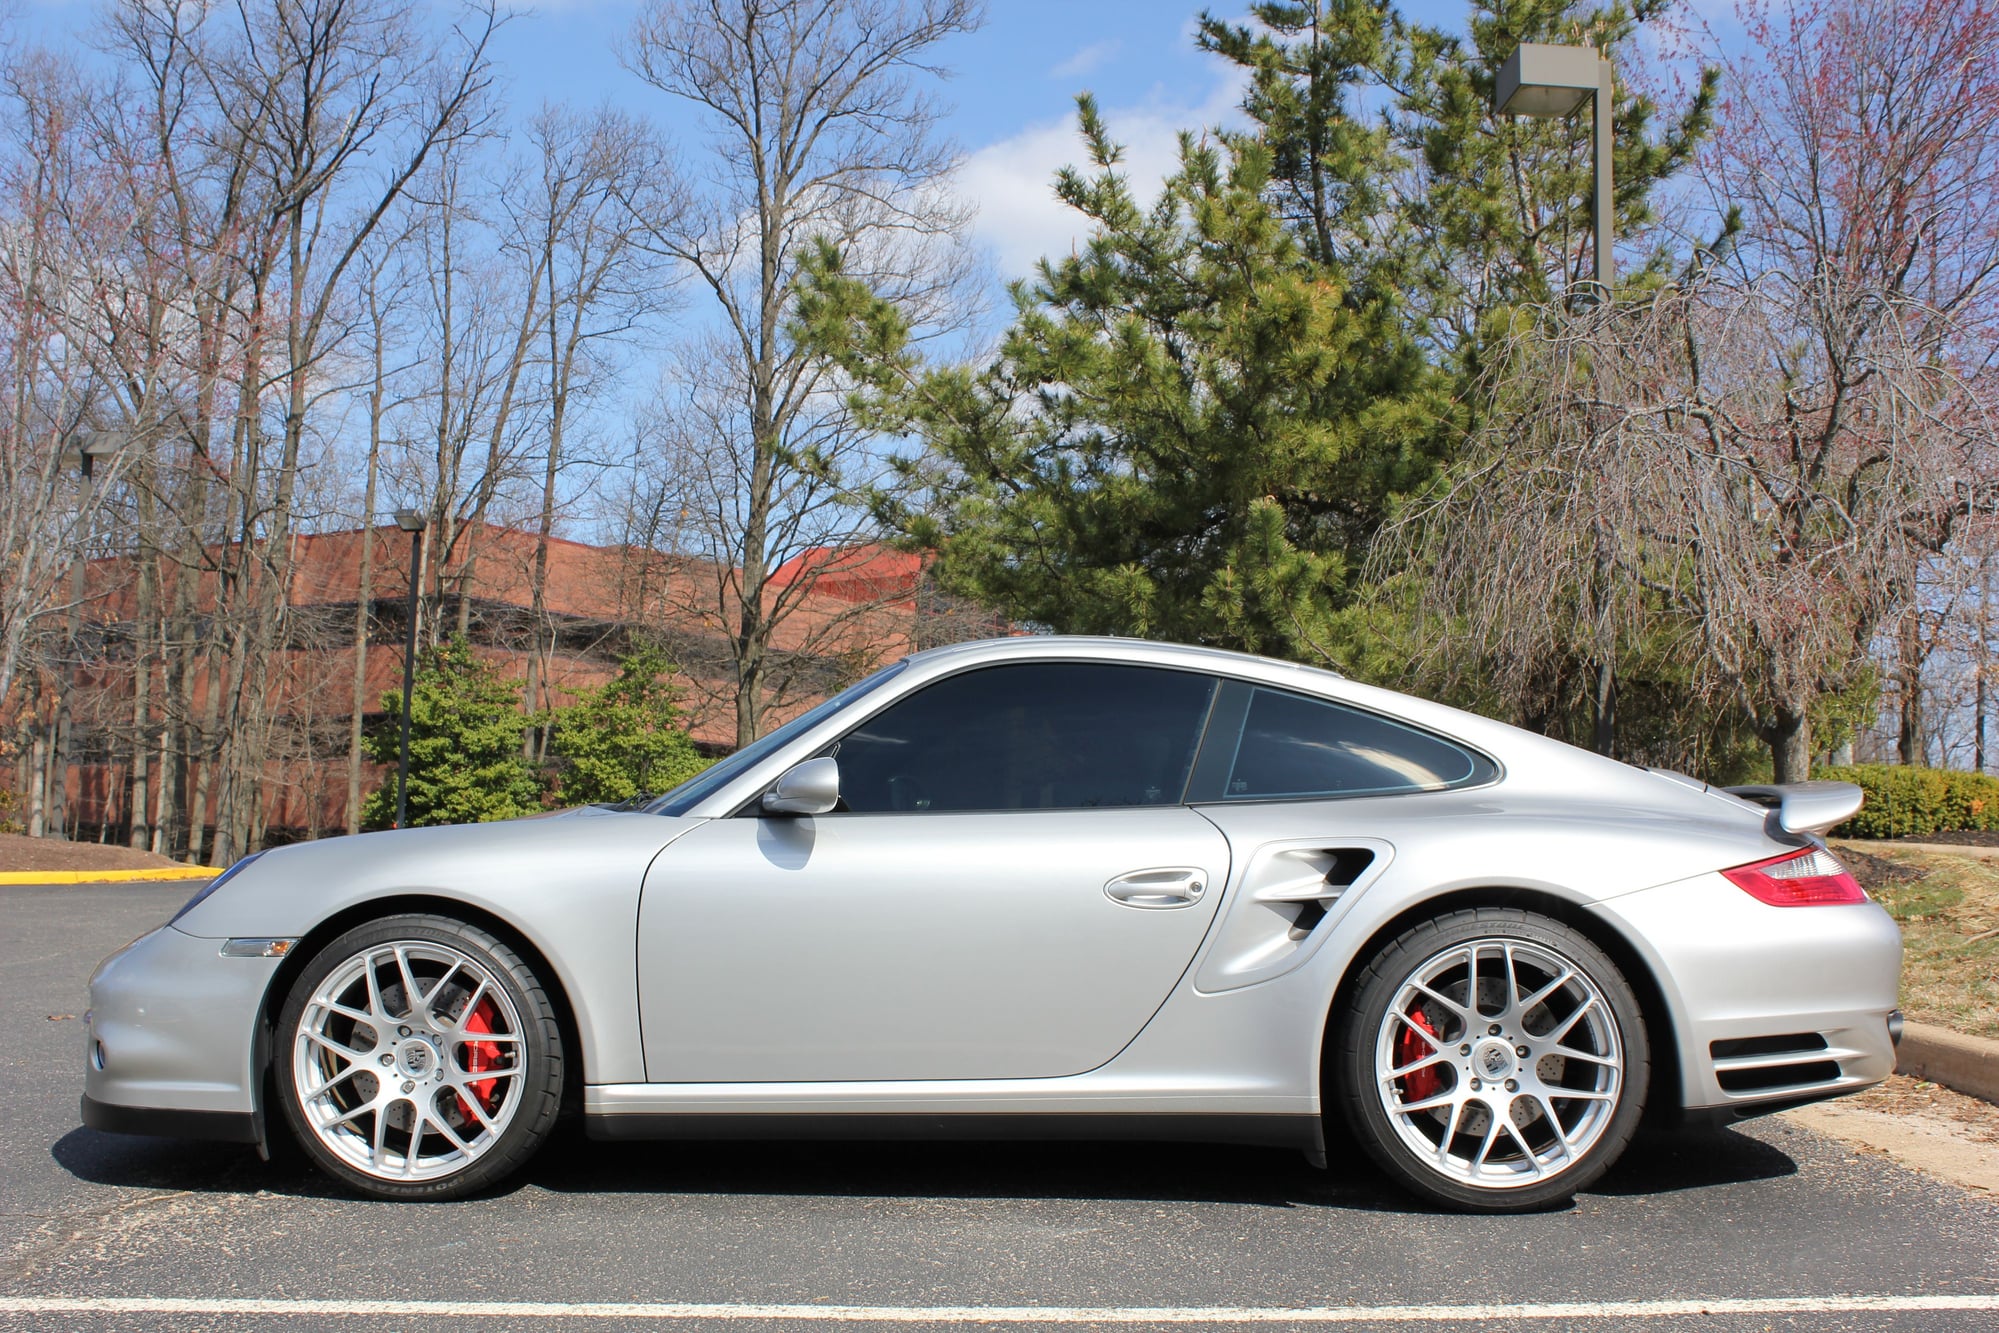 Wheels and Tires/Axles - 19" Avant Garde Ruger Mesh "Hyper Silver": 997 WB Fitment - Used - Fairfax, VA 22033, United States